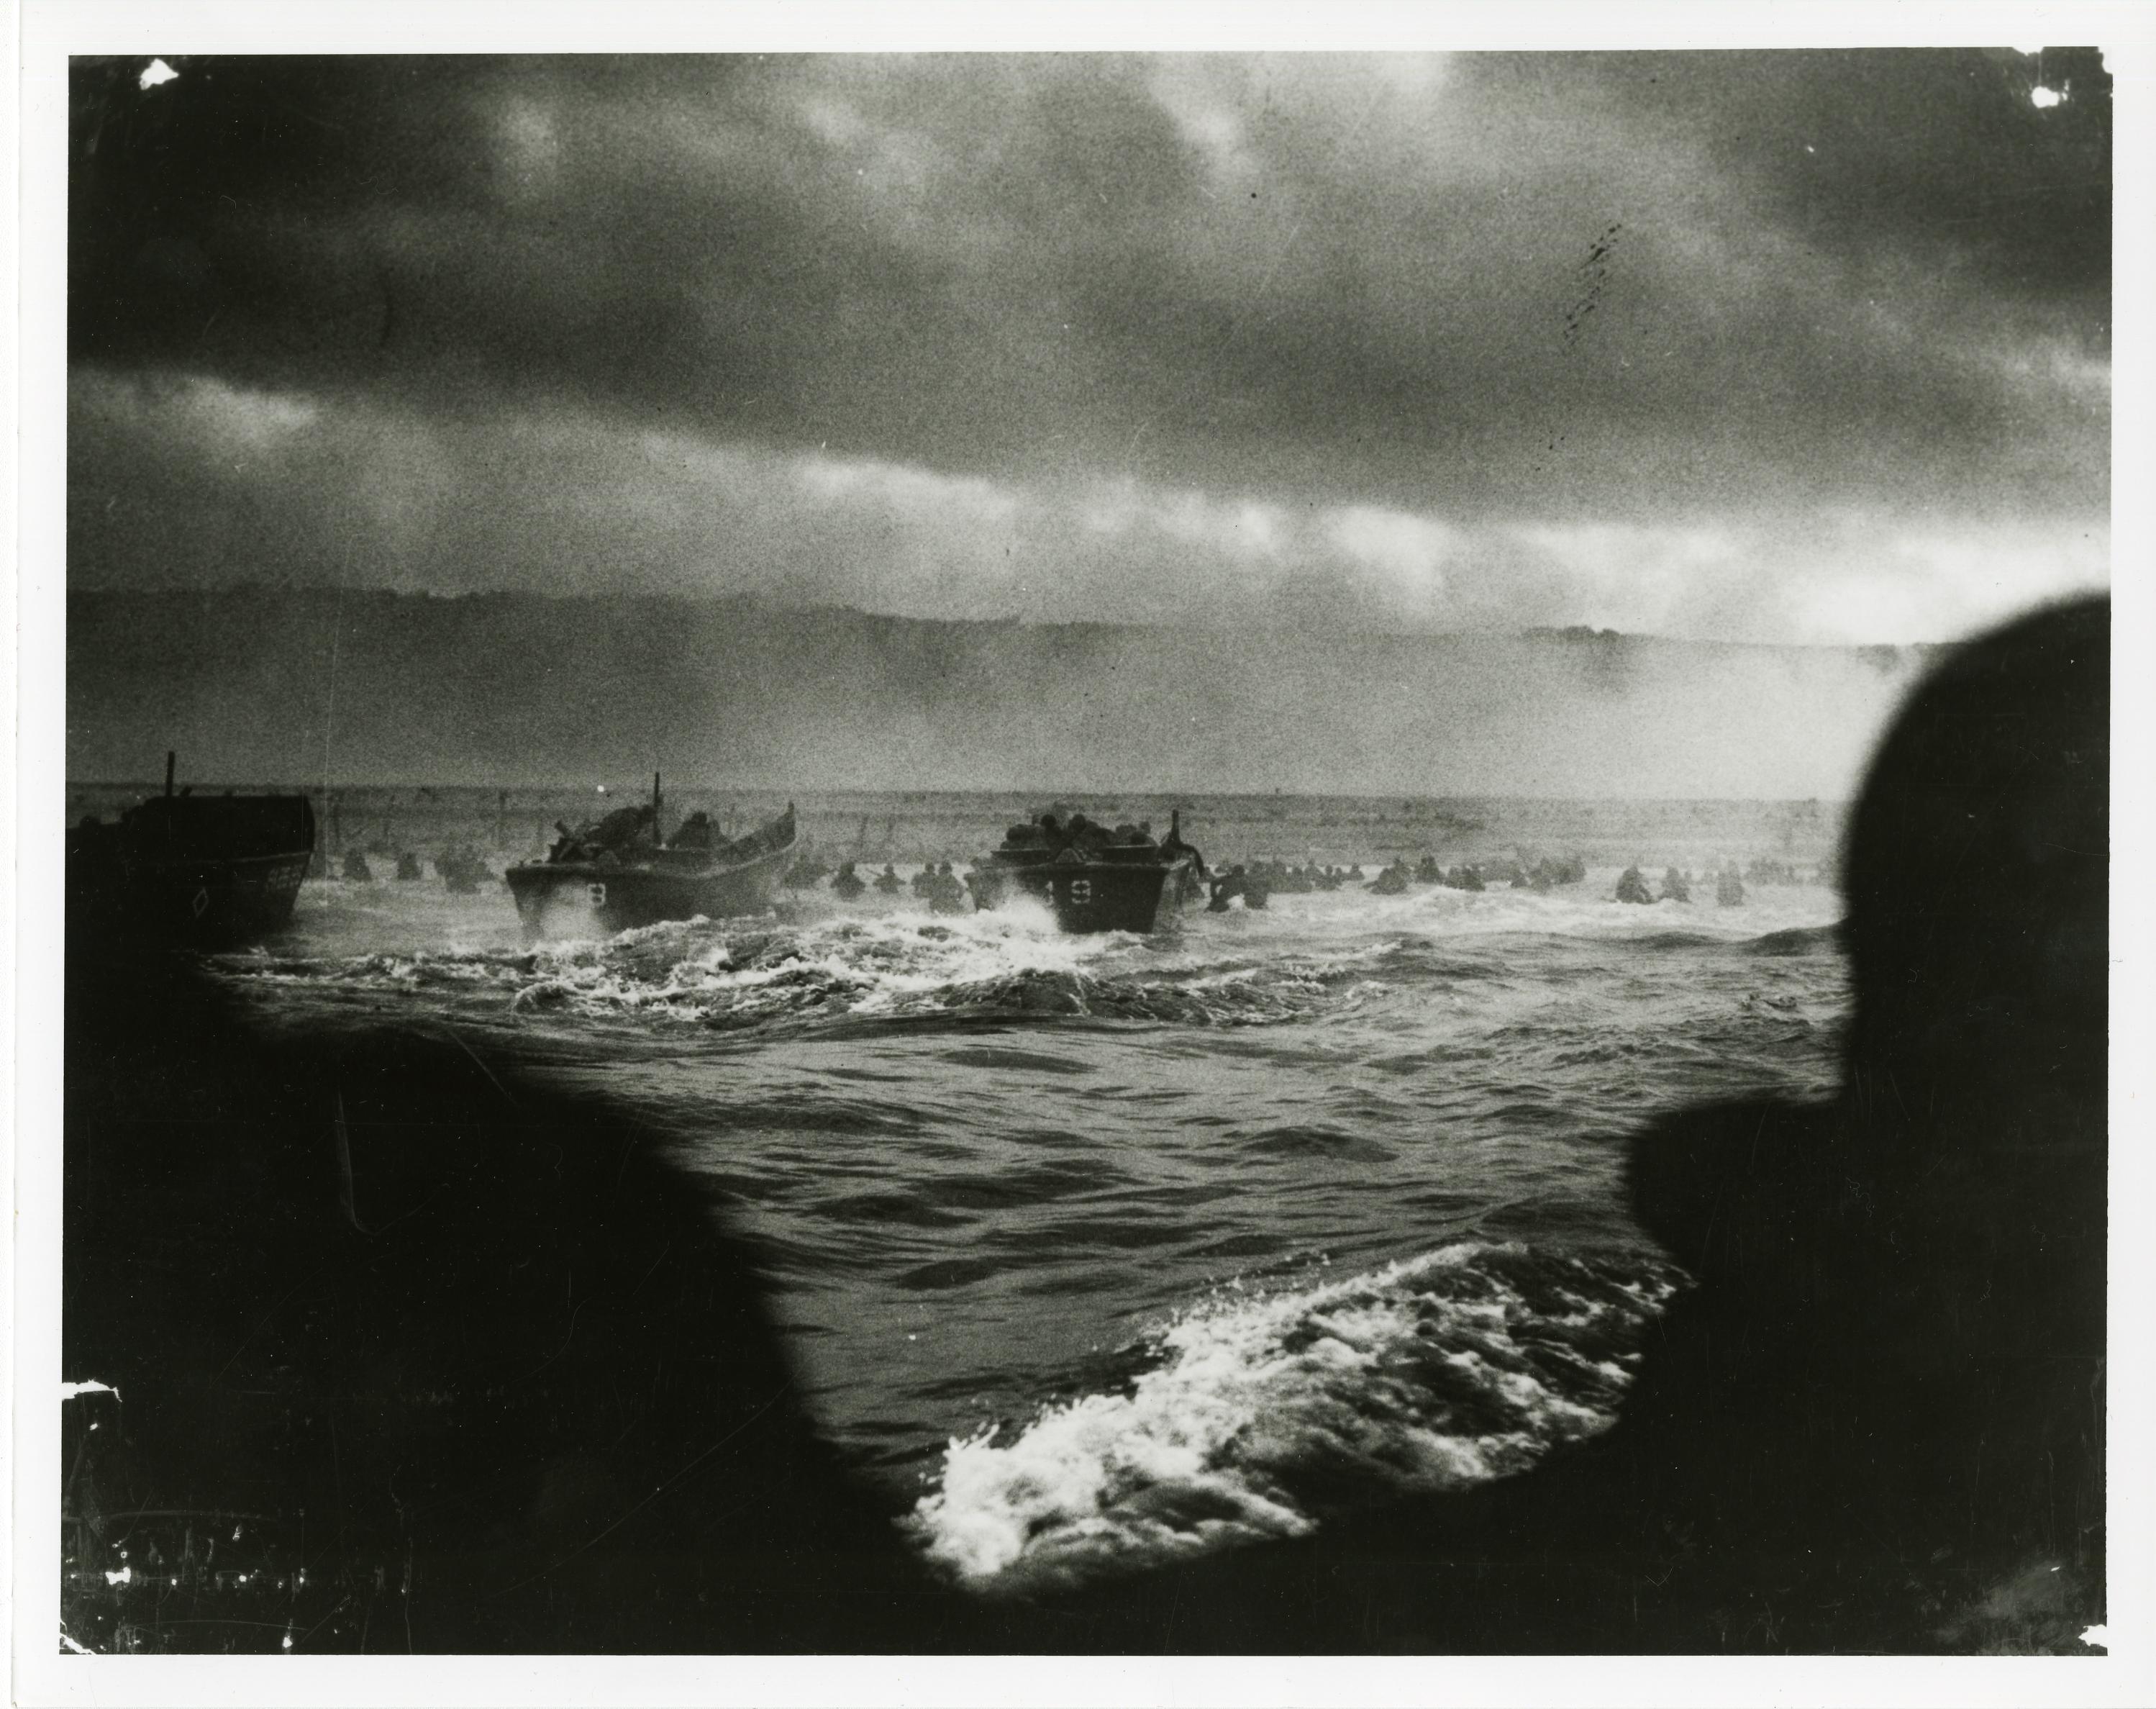 Coast Guard photograph of Landing Craft (LCVPs) running toward the beaches of Normandy on D-Day, June 6, 1944. (Coast Guard Collection)